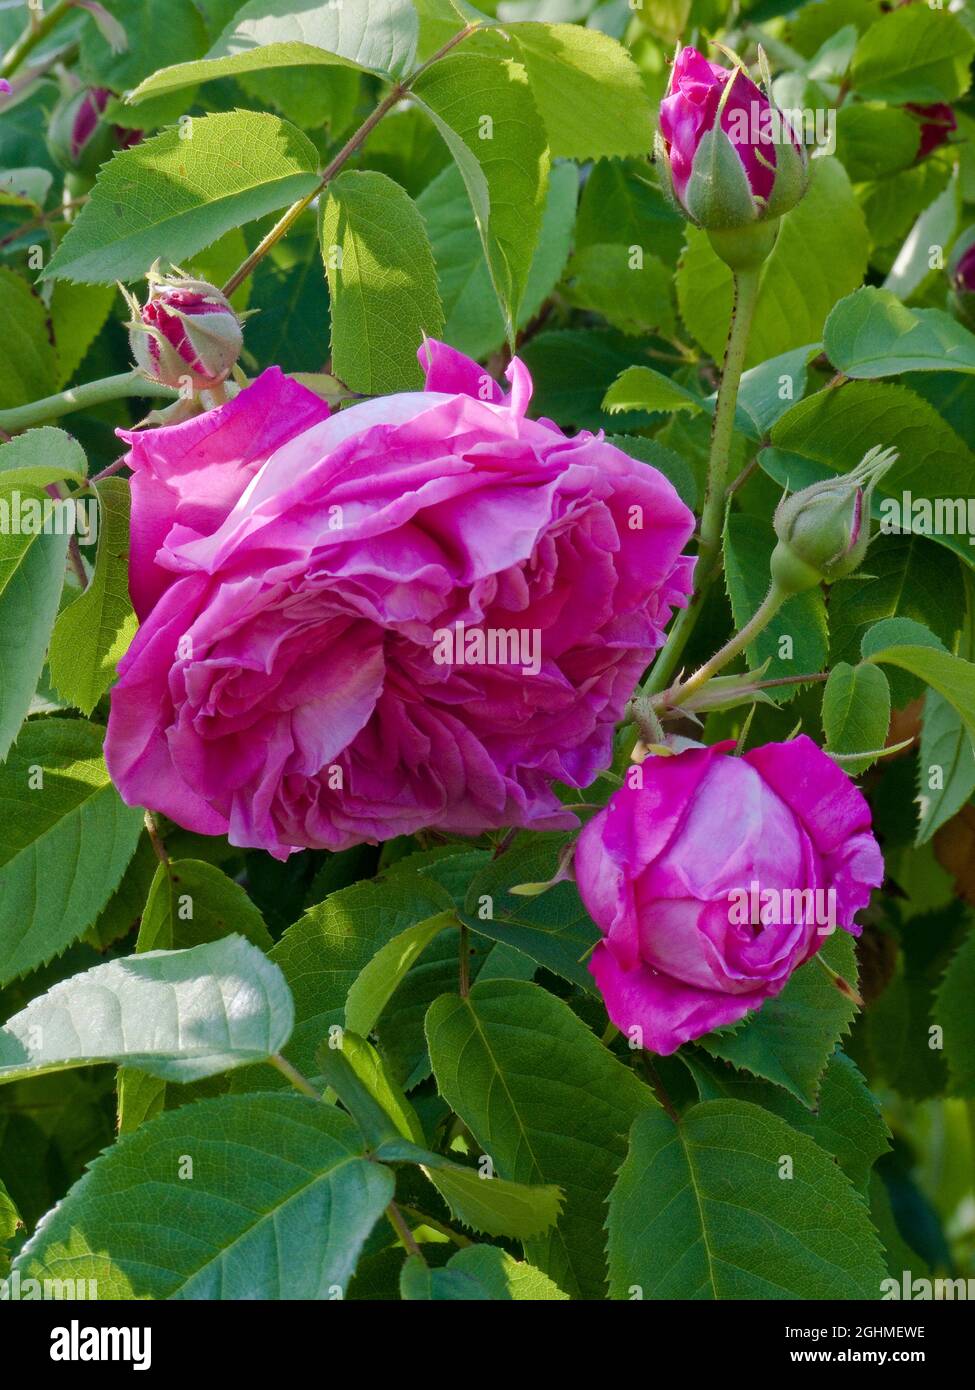 Rose 'General Jacqueminot' in a garden Stock Photo - Alamy